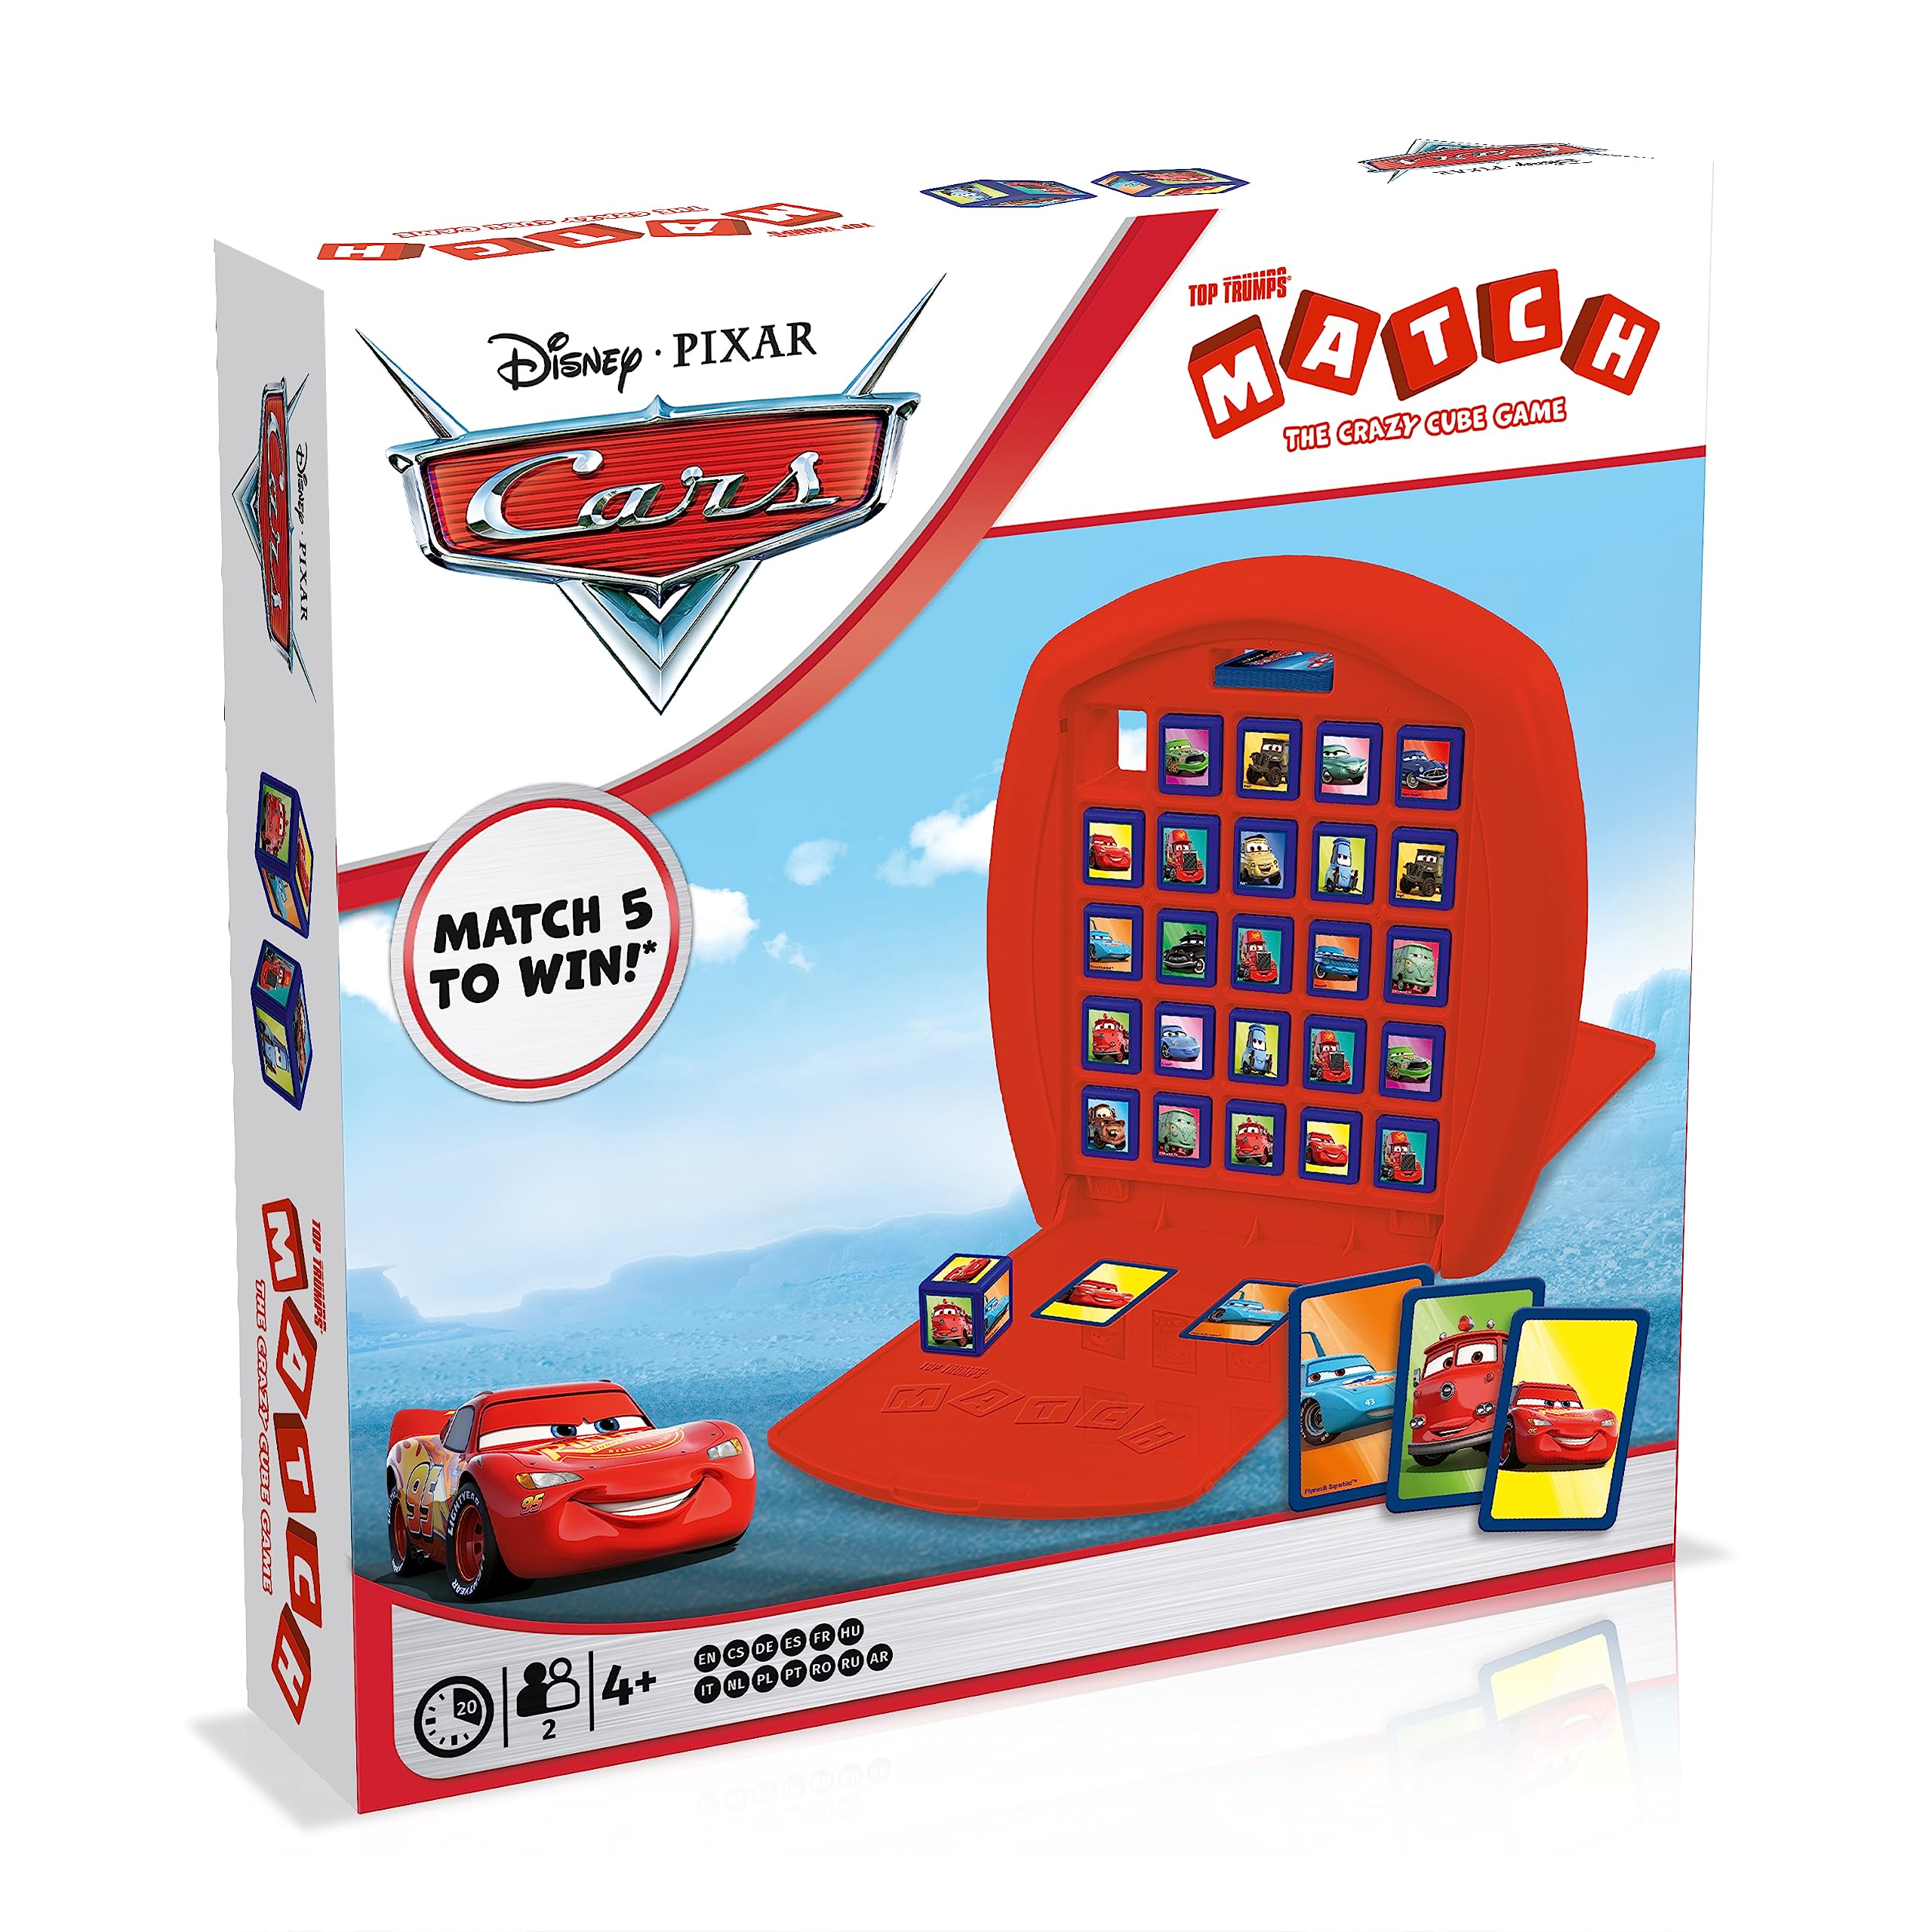 Top Trumps Pixar Cars Match Board Game; Matching Cube Game with Characters Like Lightning McQueen, Mater, and More|Family Game for Ages 4 and up